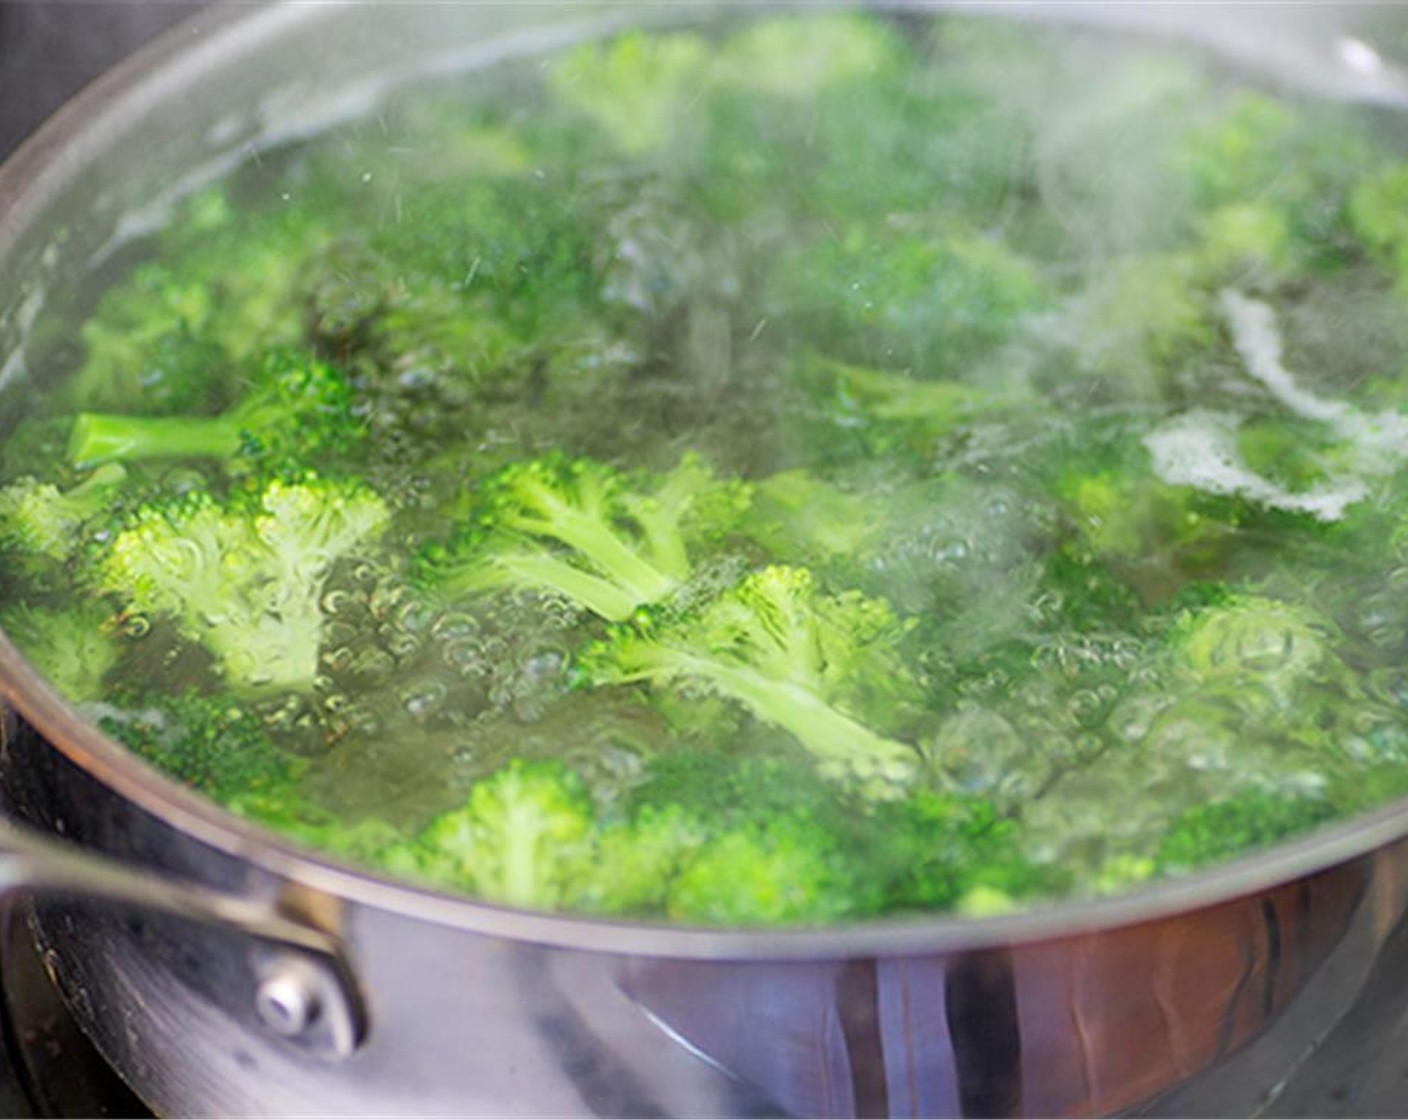 step 3 Cut the Broccoli (3 heads) into florets. Bring a pot of water to a boil. Blanch the broccoli by throwing the florets into the boiling water until bright green and still crisp, 1 to 2 minutes.